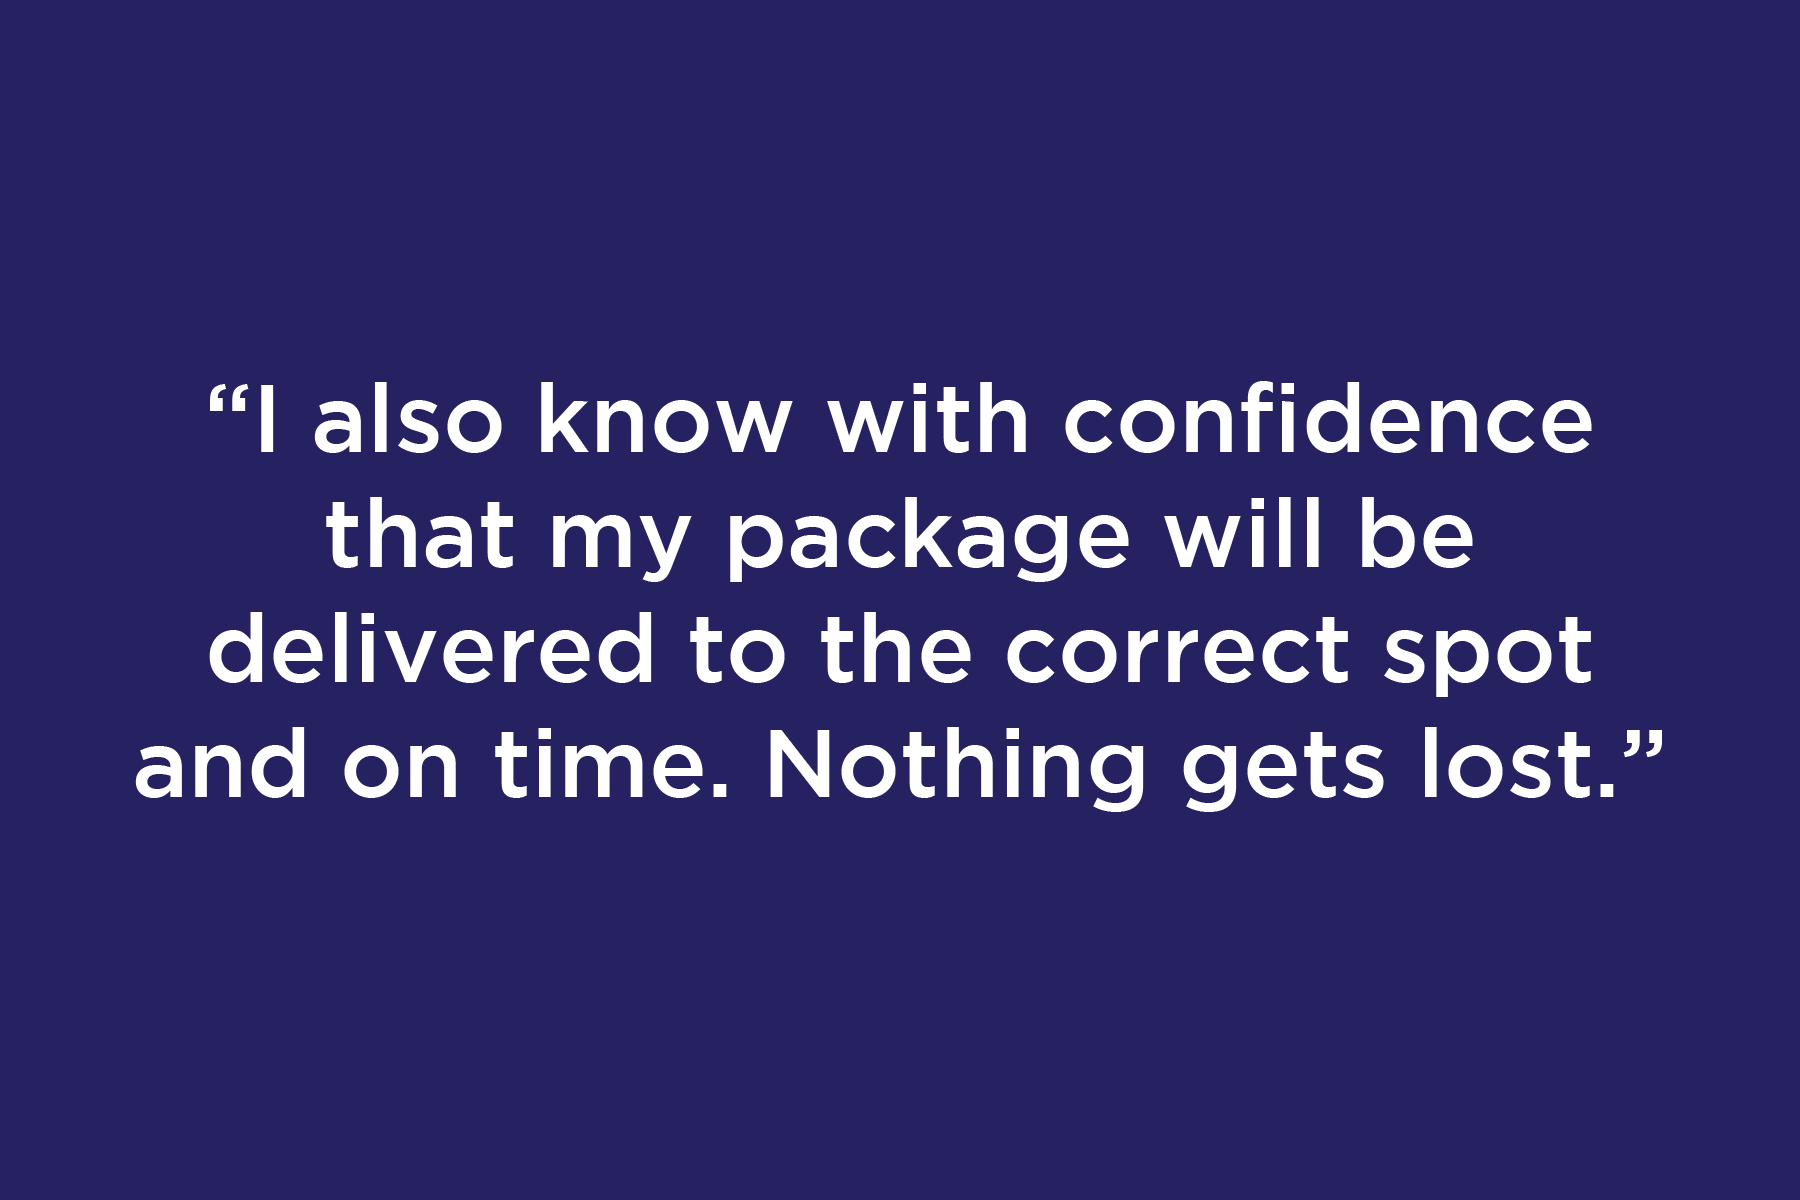 I also know with confidence that my package will be delivered to the correct spot and on time. Nothing gets lost.